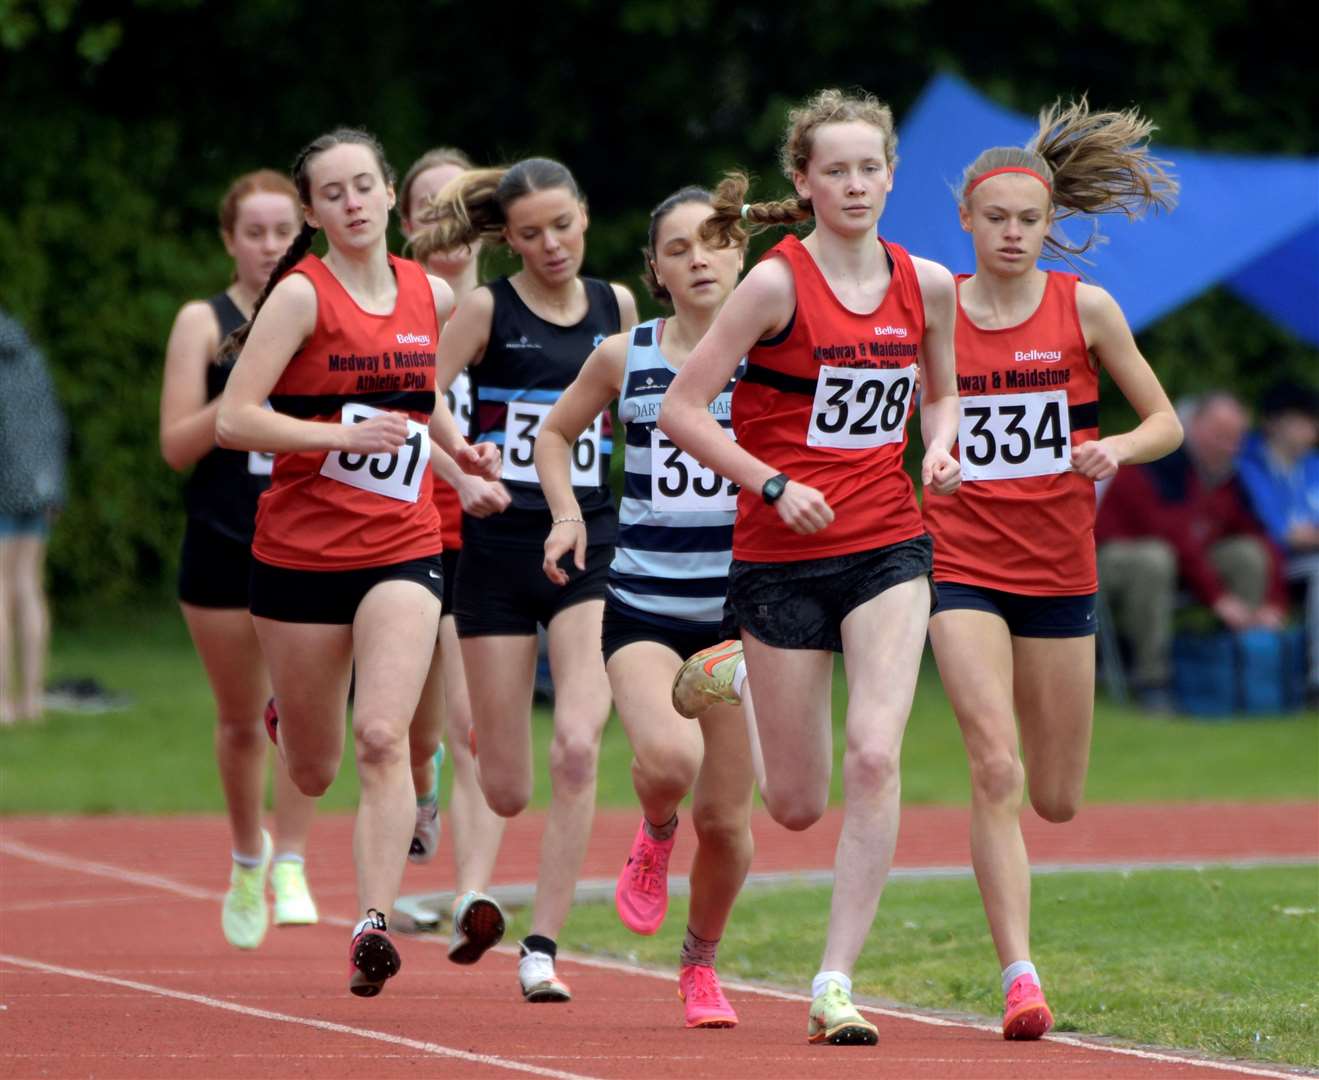 No.331 Abigail Hawkes, No.334 Amber Matthews and No.328 Iris Crossley of Medway and Maidstone taking part in the under-17 women’s 800m. Picture: Barry Goodwin